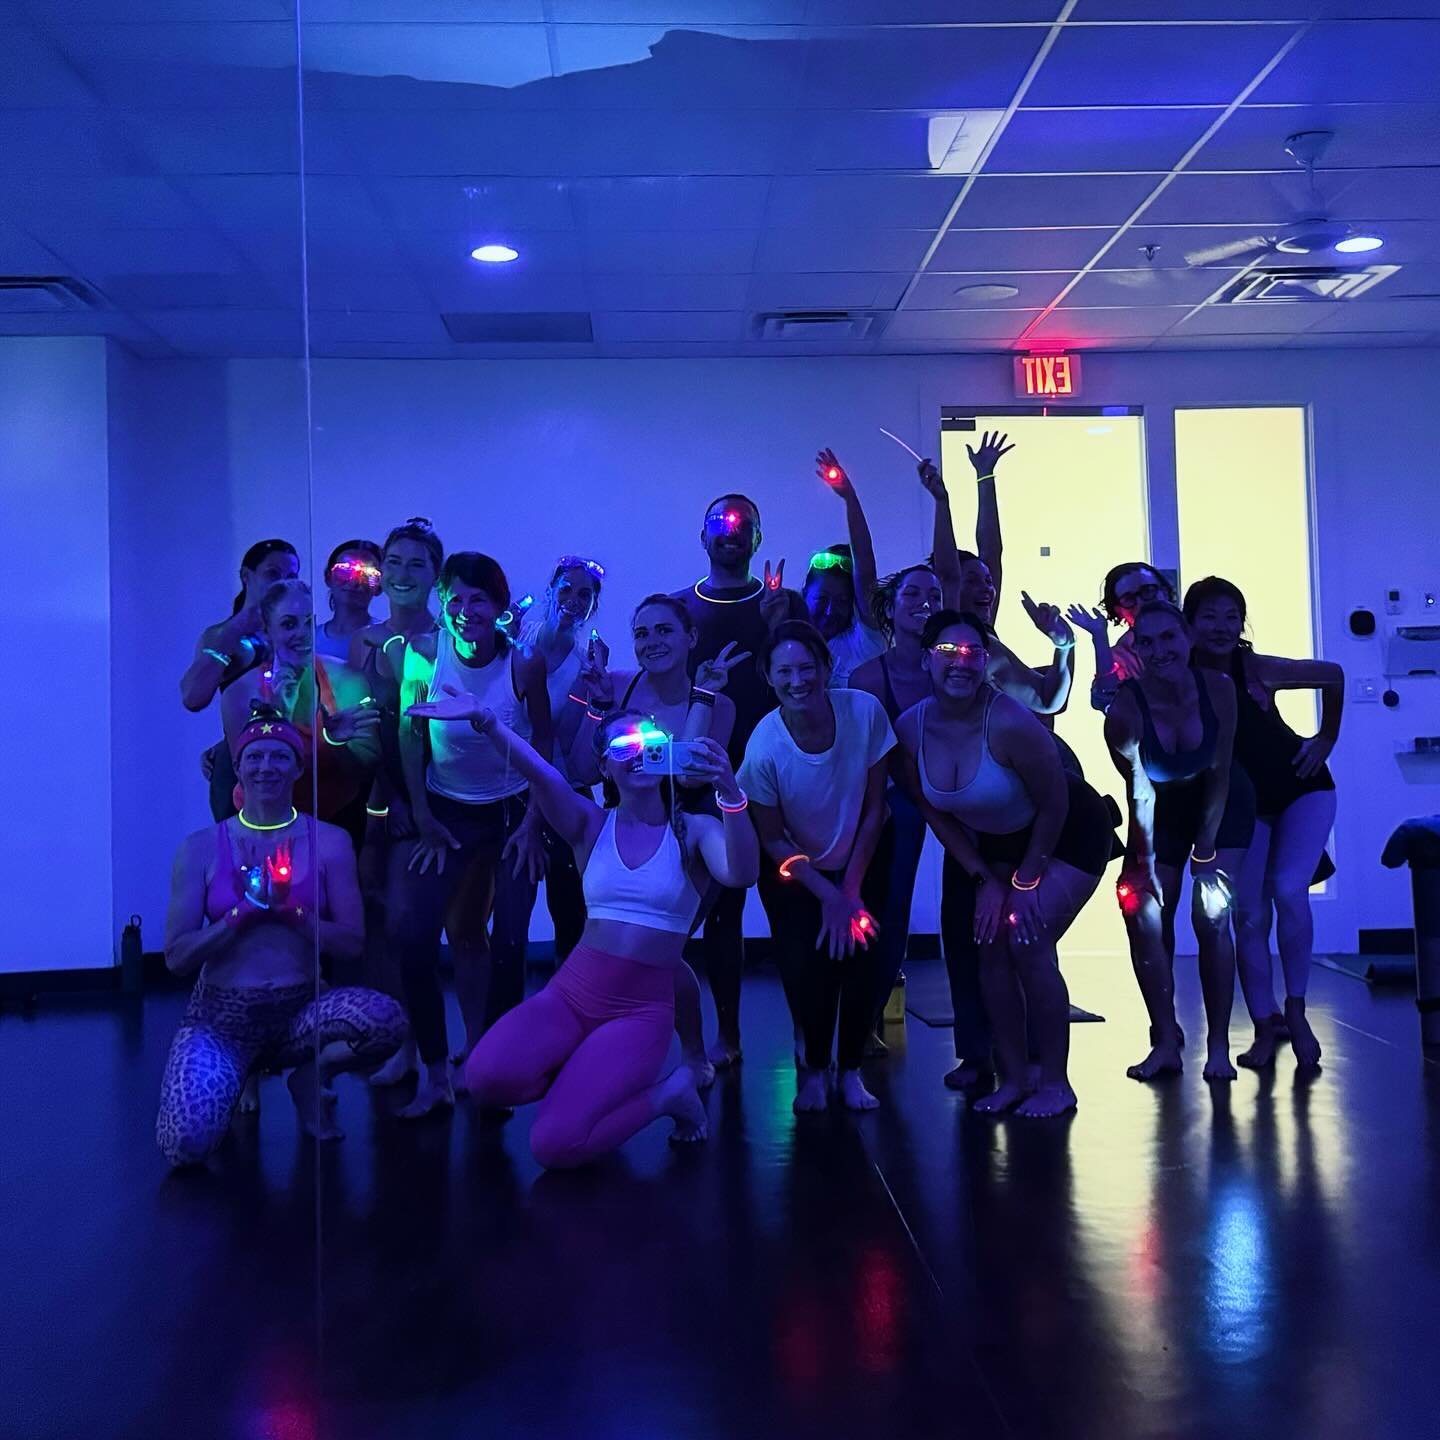 Minija and the podFAM 💙🌟 absolutely rocked out in a fit fusion glow flow yesterday ✨ We love offering unique and fun workshops + pop-up classes!! Our next offering to enrich your practice is an Arm Balalnce workshop on May 11th ➡️ Sign up today at 